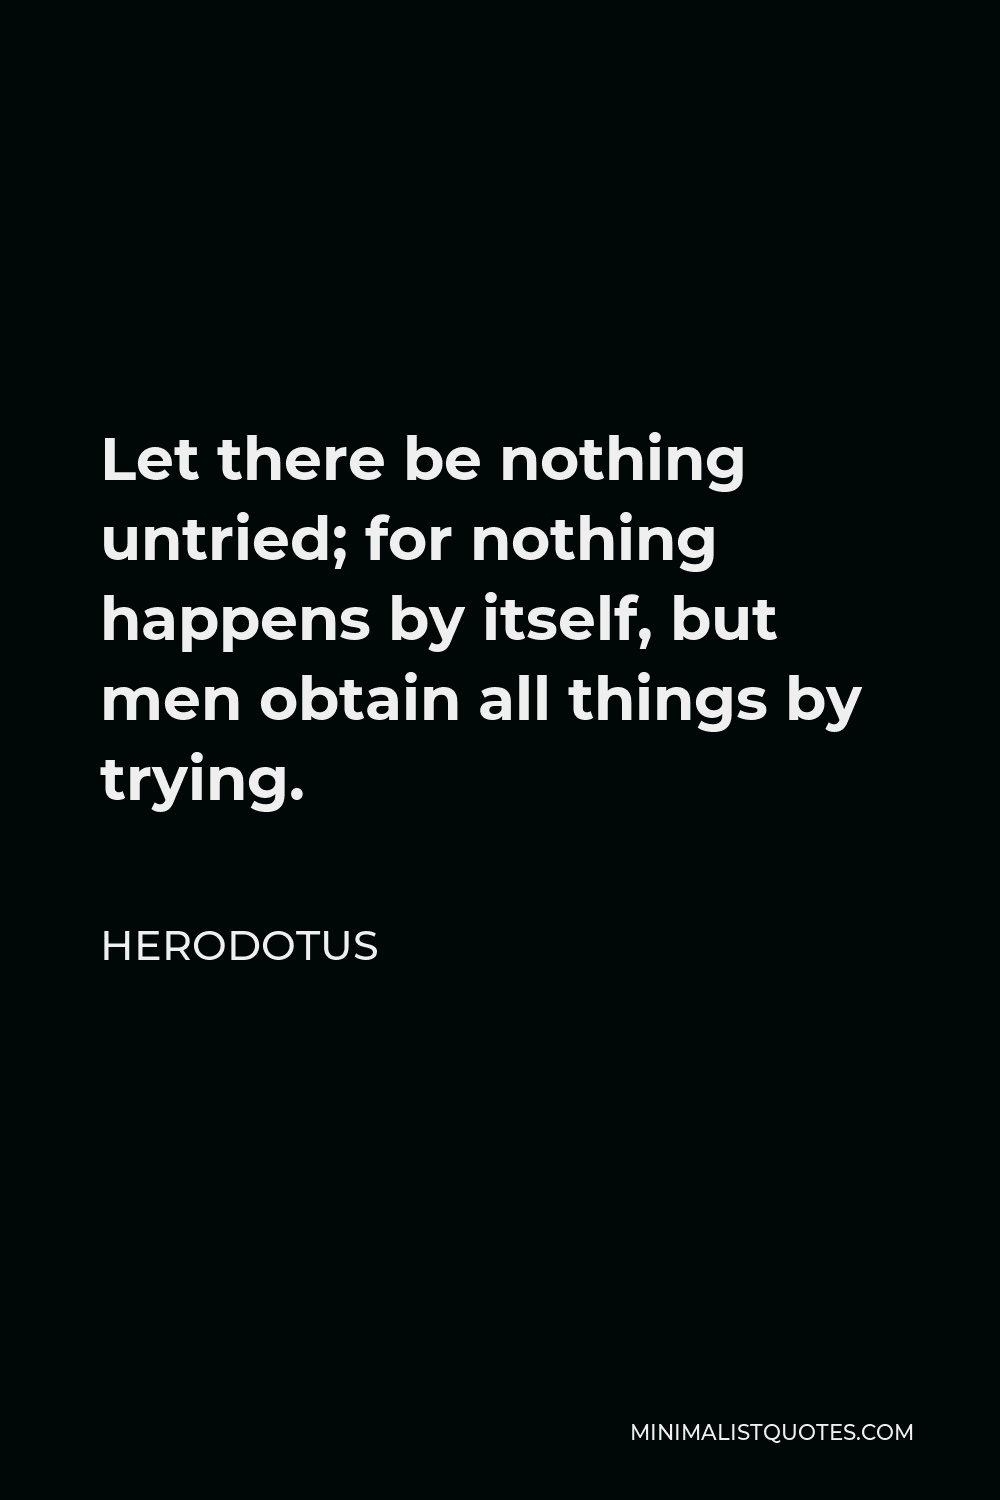 Herodotus Quote - Let there be nothing untried; for nothing happens by itself, but men obtain all things by trying.